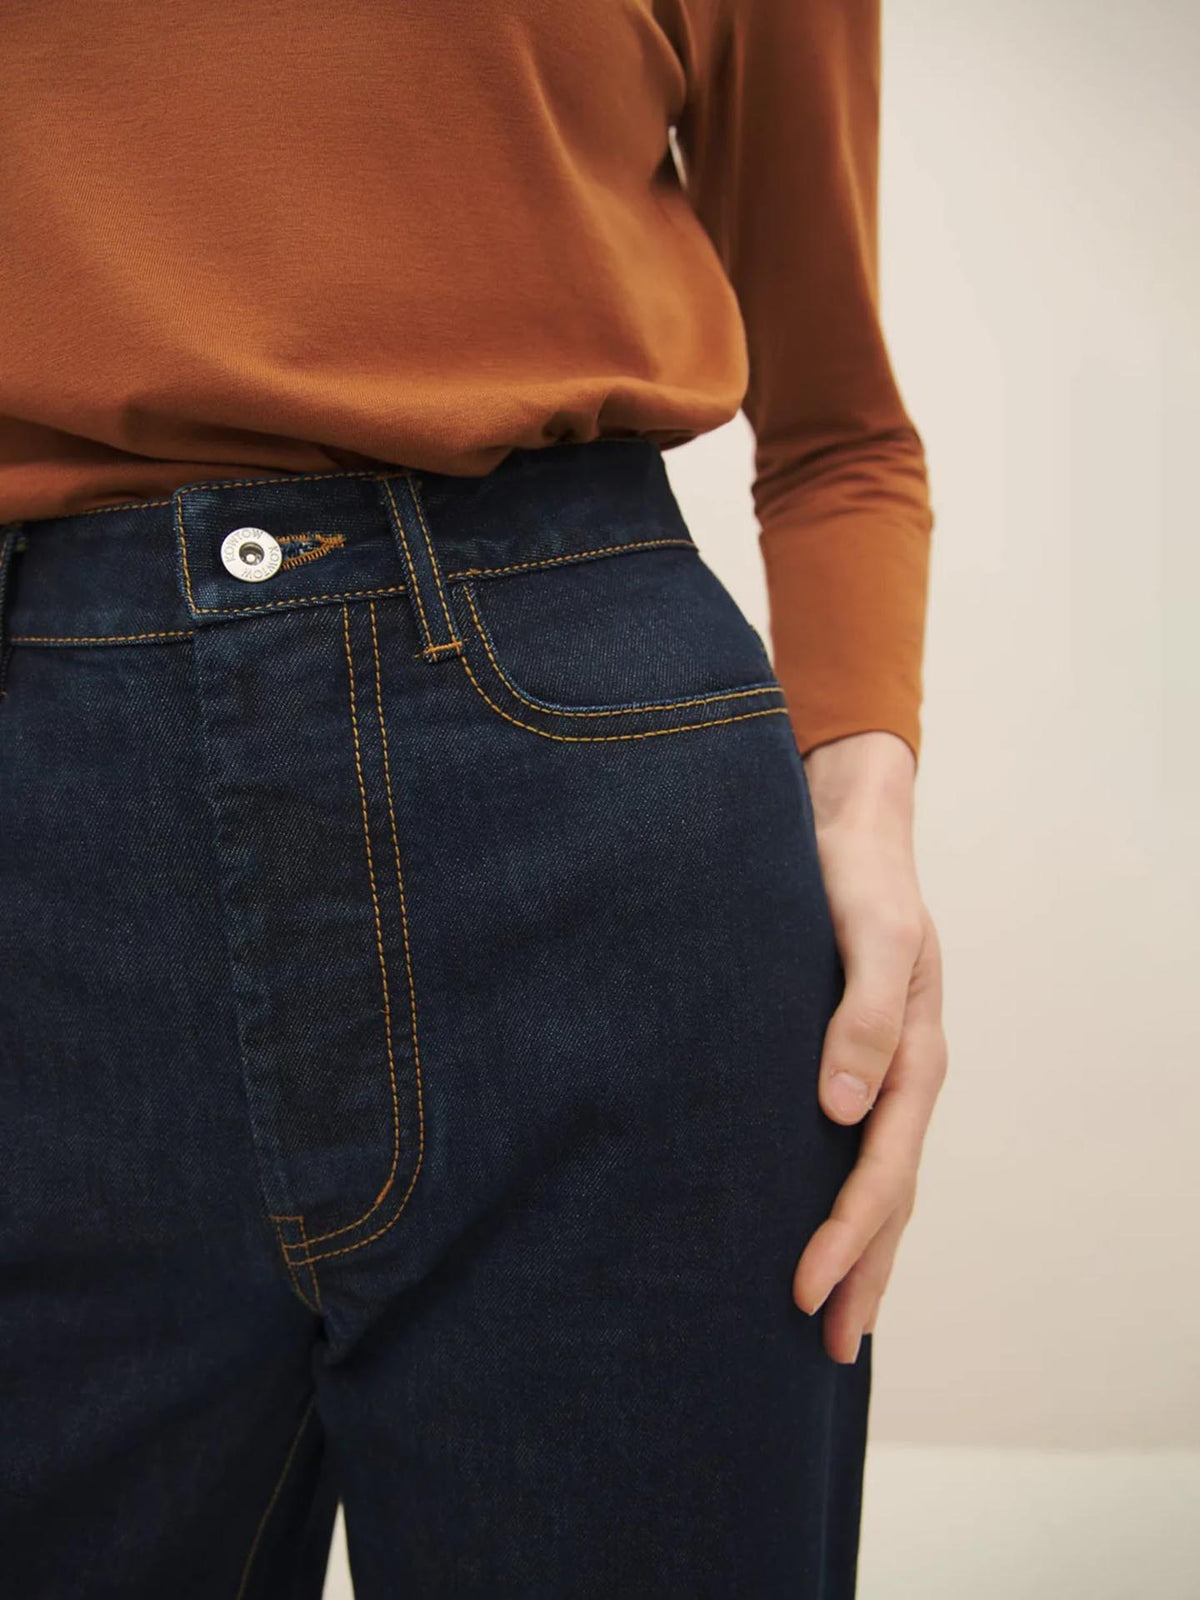 Close-up of a person wearing Kowtow high puddle jeans in indigo denim with yellow stitching, focusing on the top front part of the jeans. The person is wearing a brown top and has their hand on their hip.